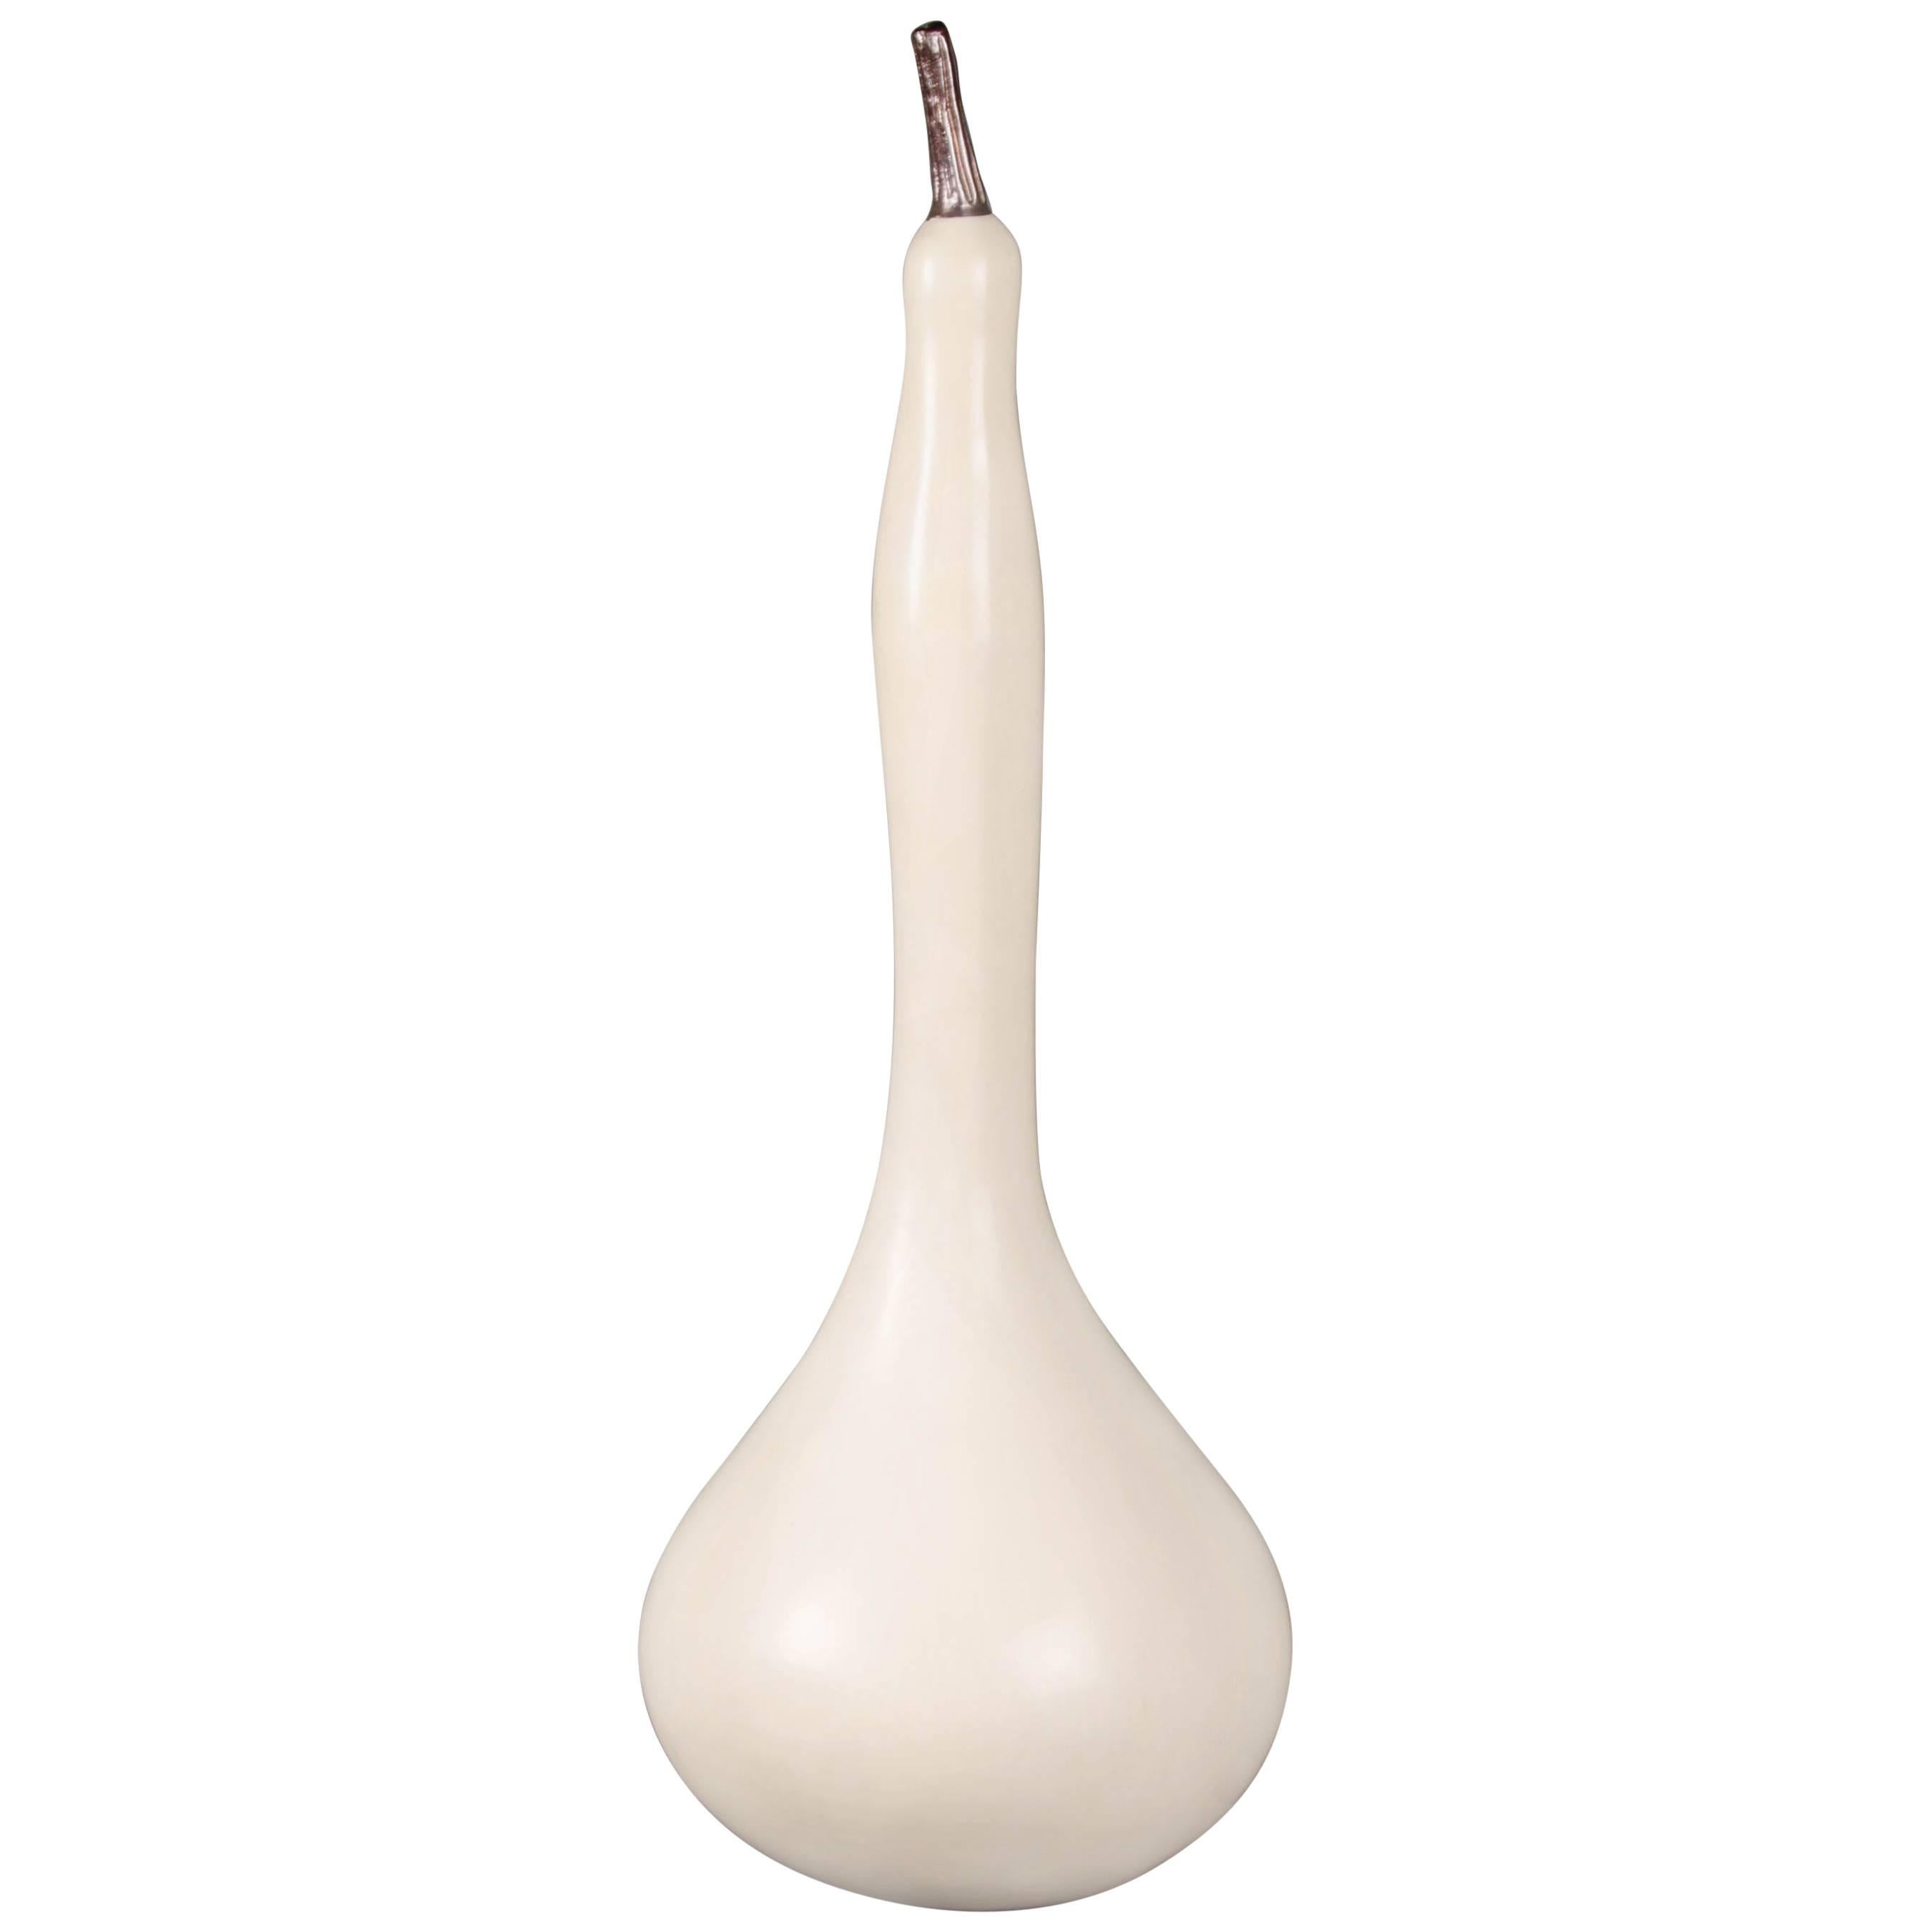 Standing Gourd Sculpture, Cream Lacquer by Robert Kuo, Limited Edition For Sale